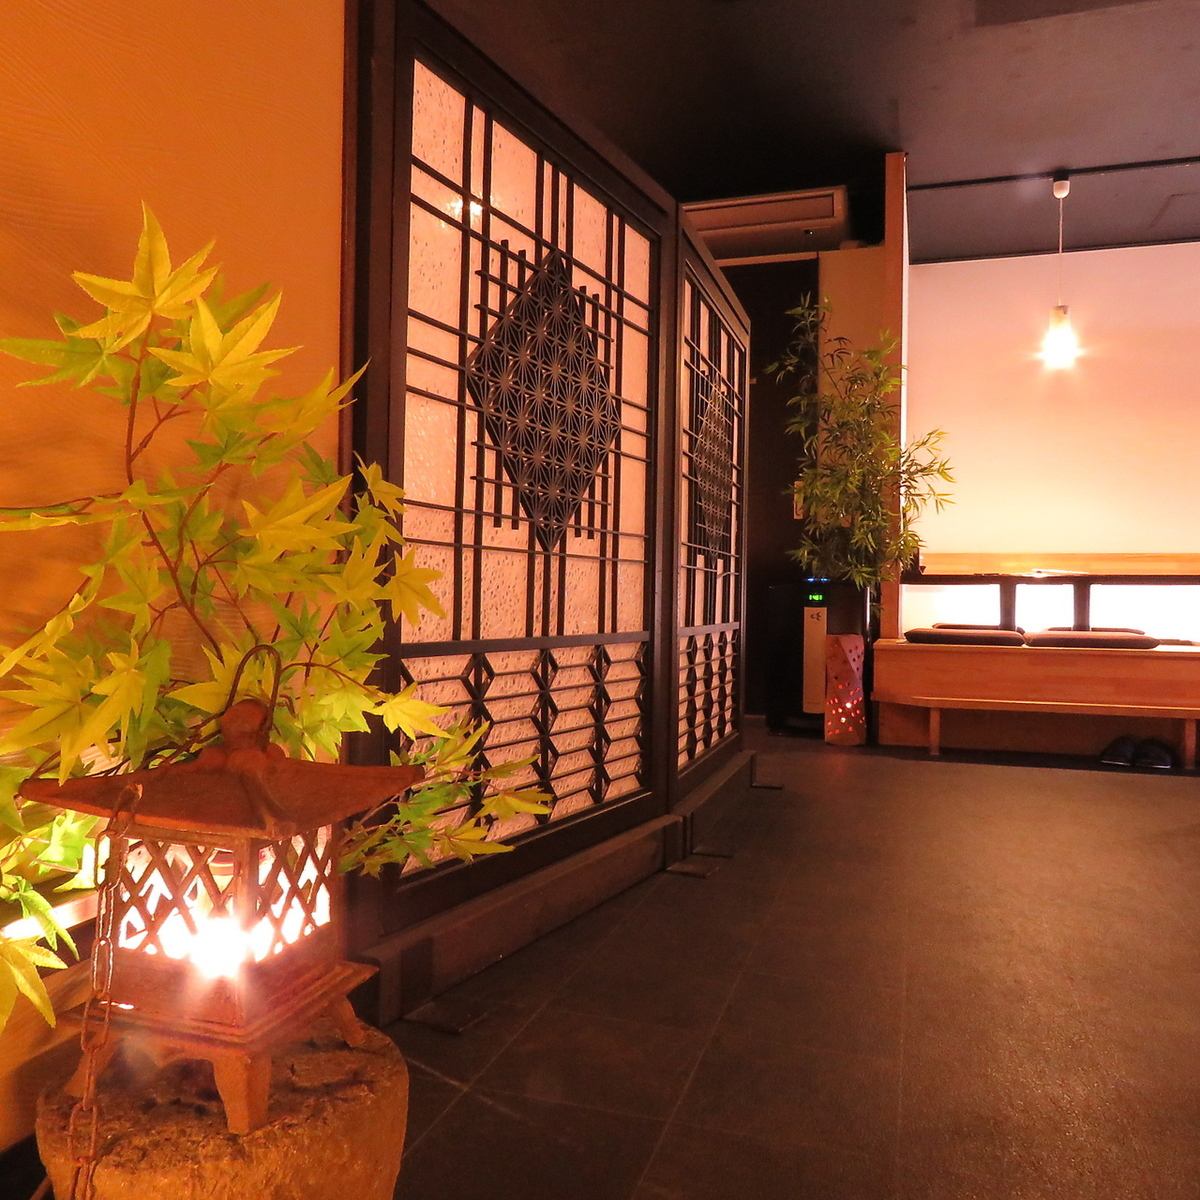 [Specially Selected Yonezawa Beef] An adult hideaway perfect for entertaining your loved ones